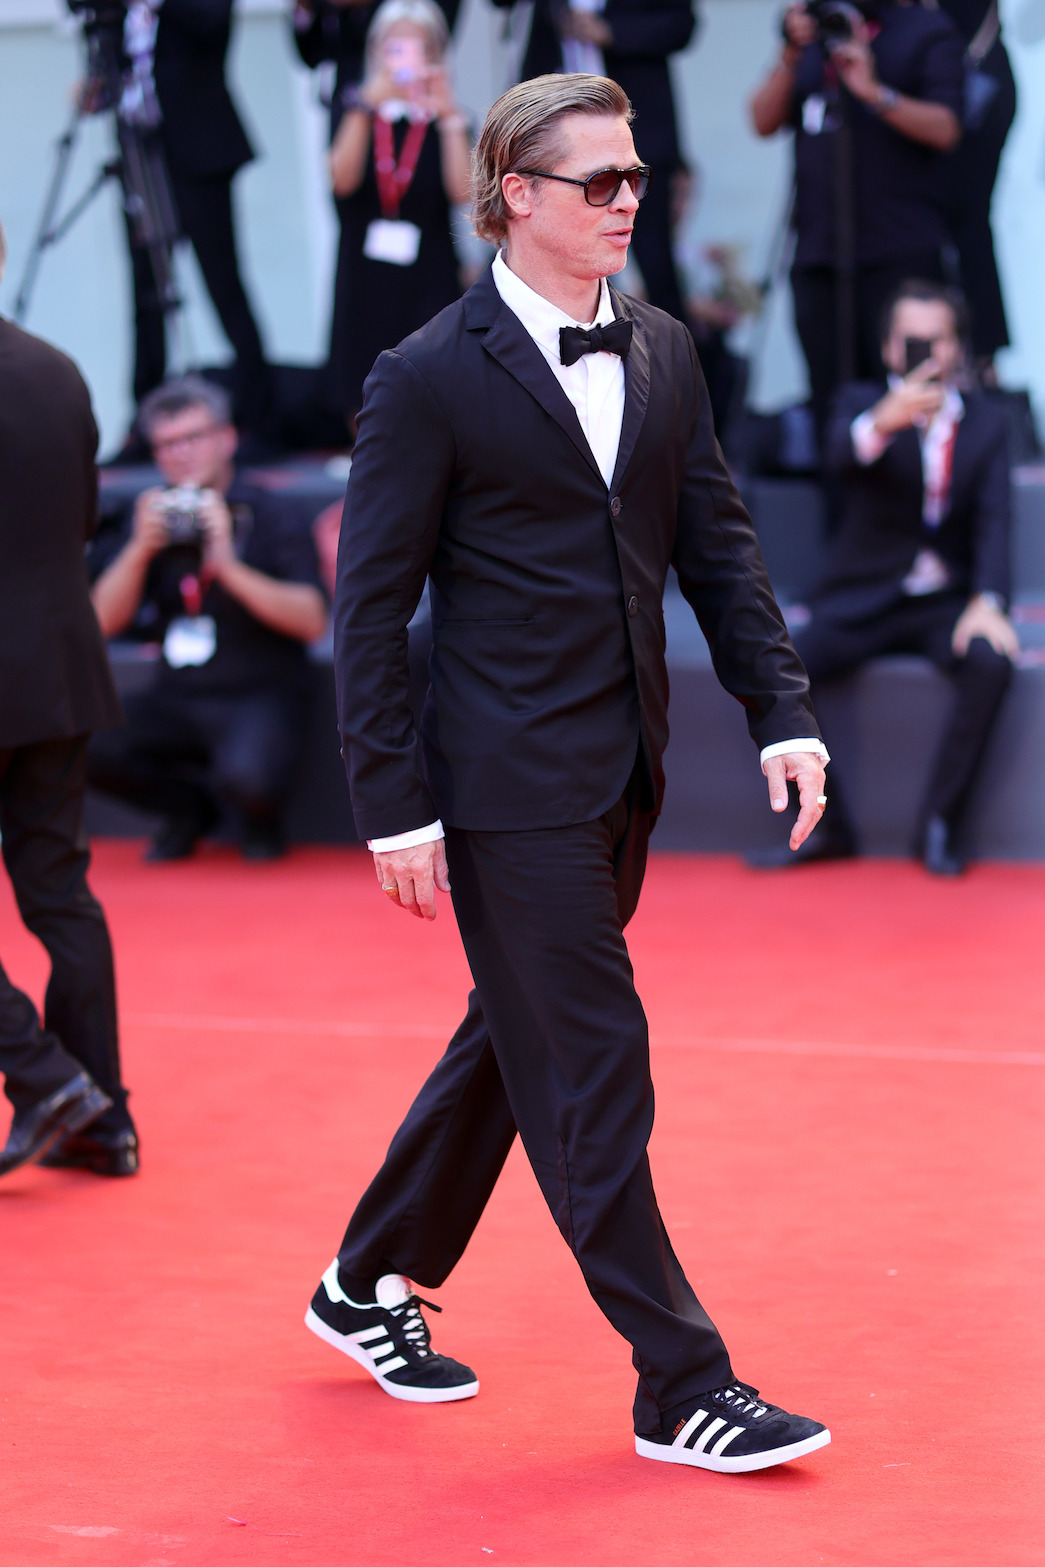 The Cast of ‘Blonde’ Walks the Red Carpet at the Venice Film Festival ...